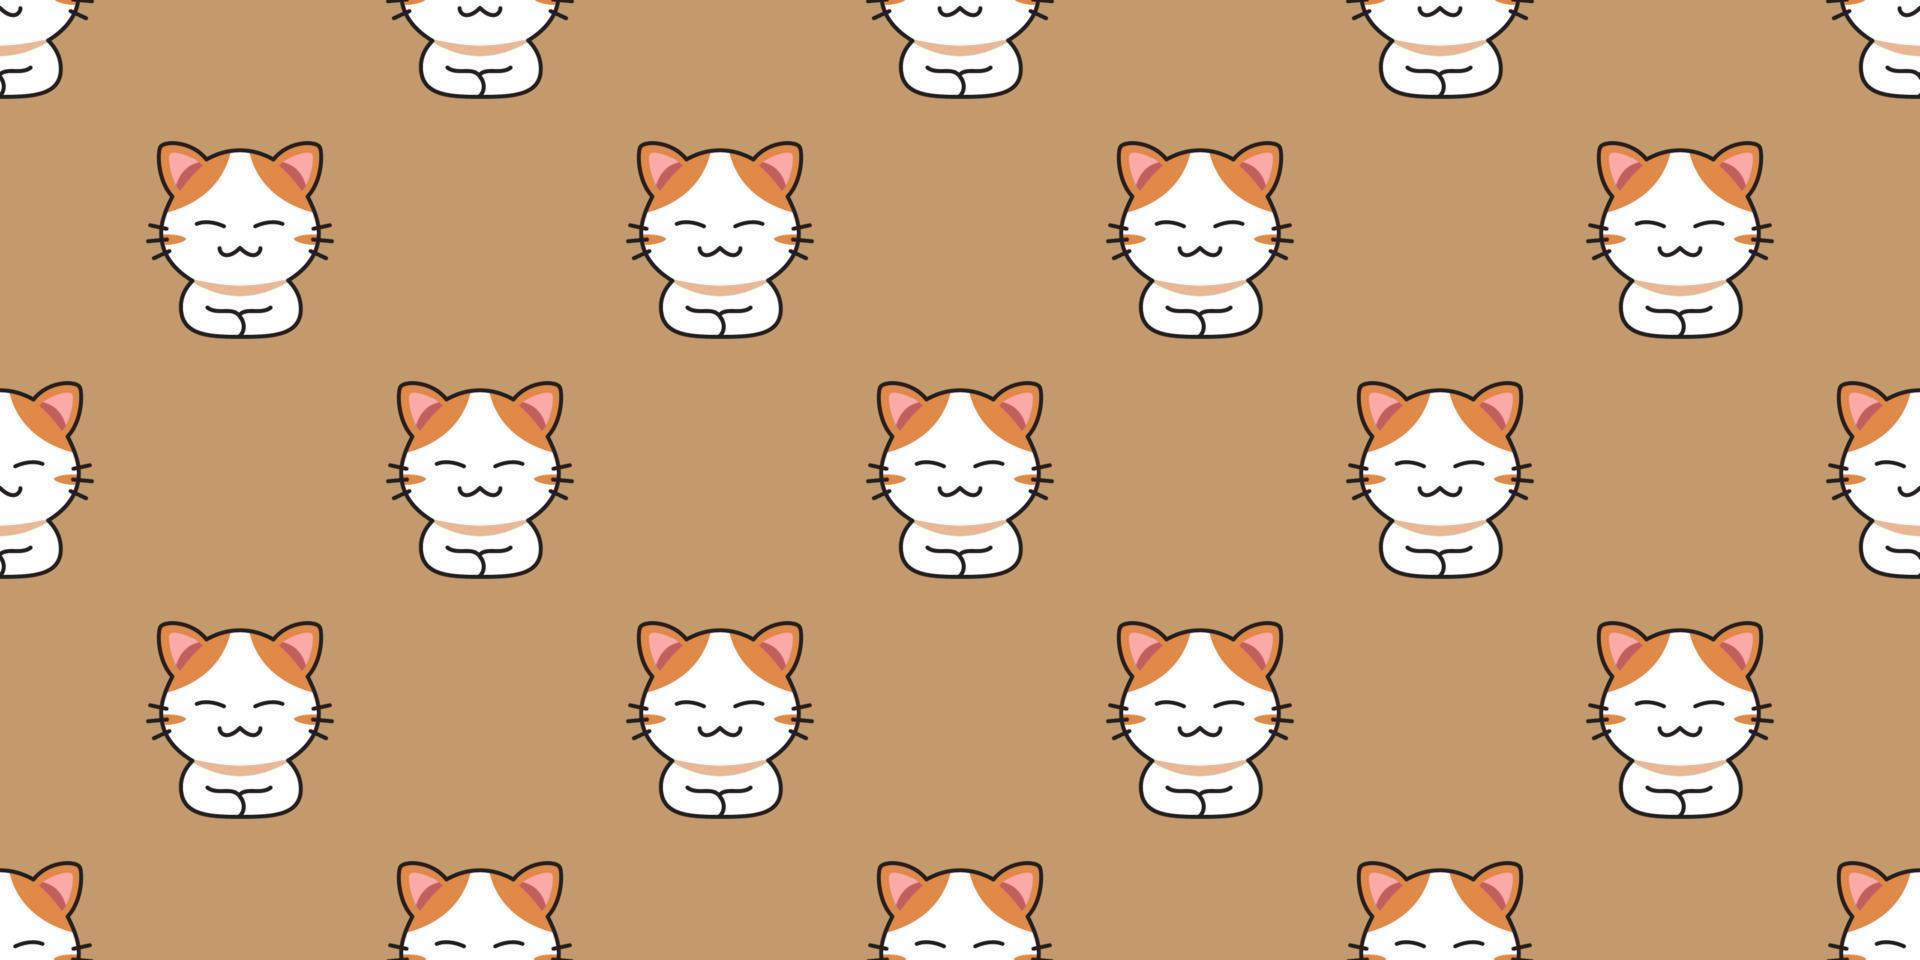 Cartoon character cat seamless pattern background vector